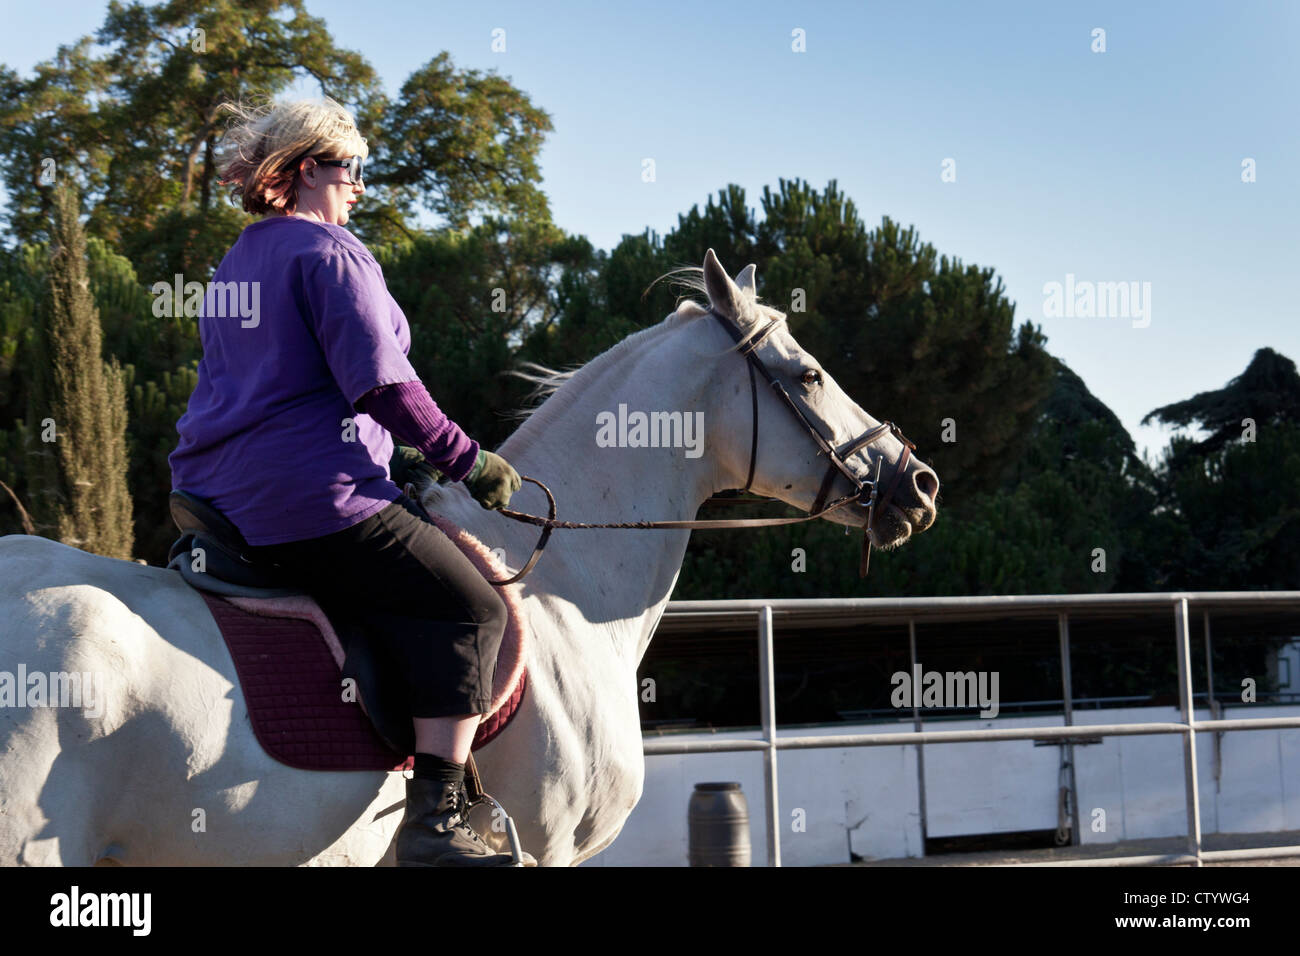 A blond haired woman is riding a white horse with a dressage saddle. Stock Photo